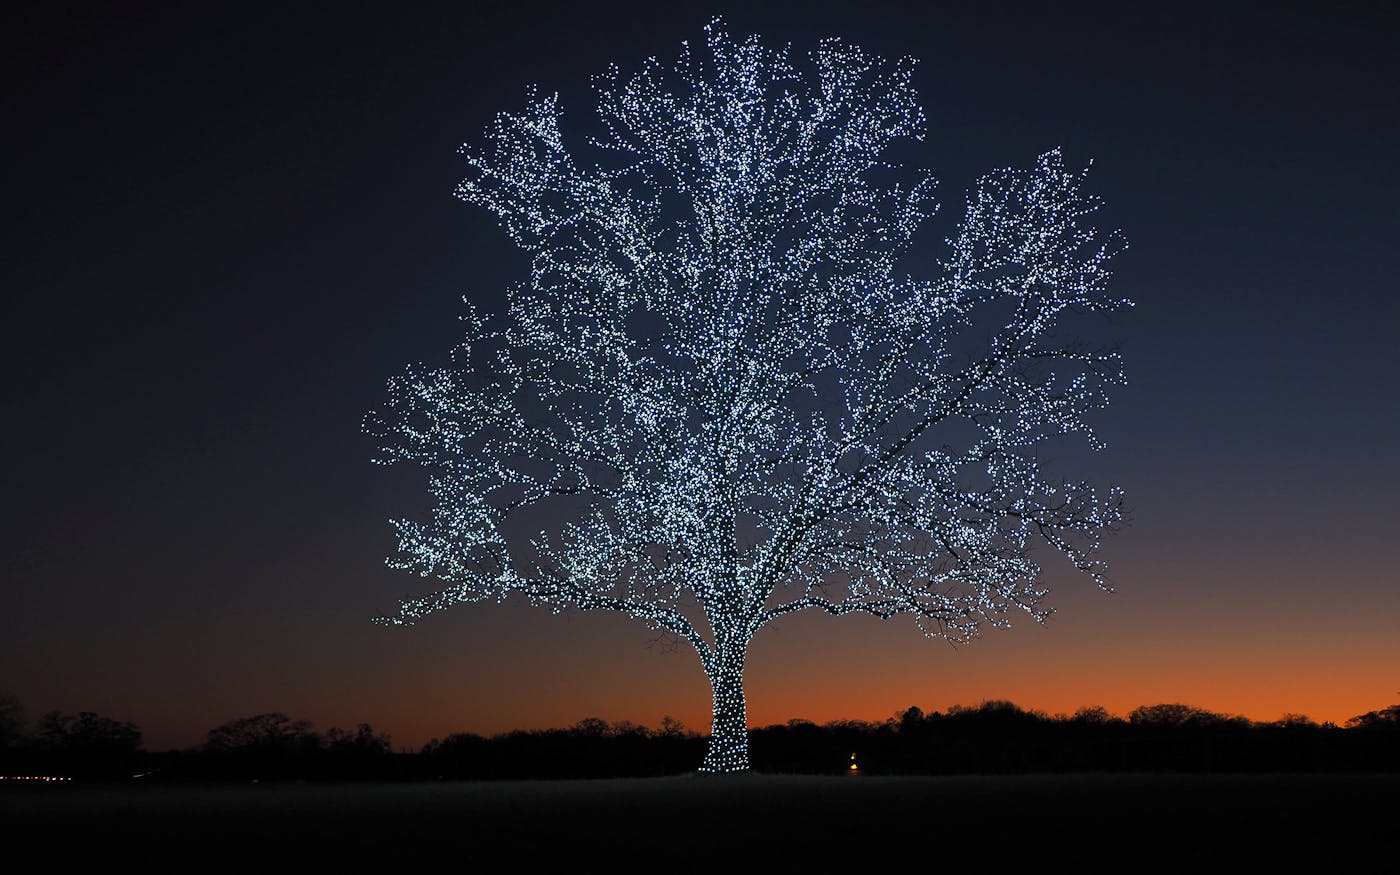 An Old Pecan Tree Is a Beacon of Hope at the Holidays – Texas Monthly